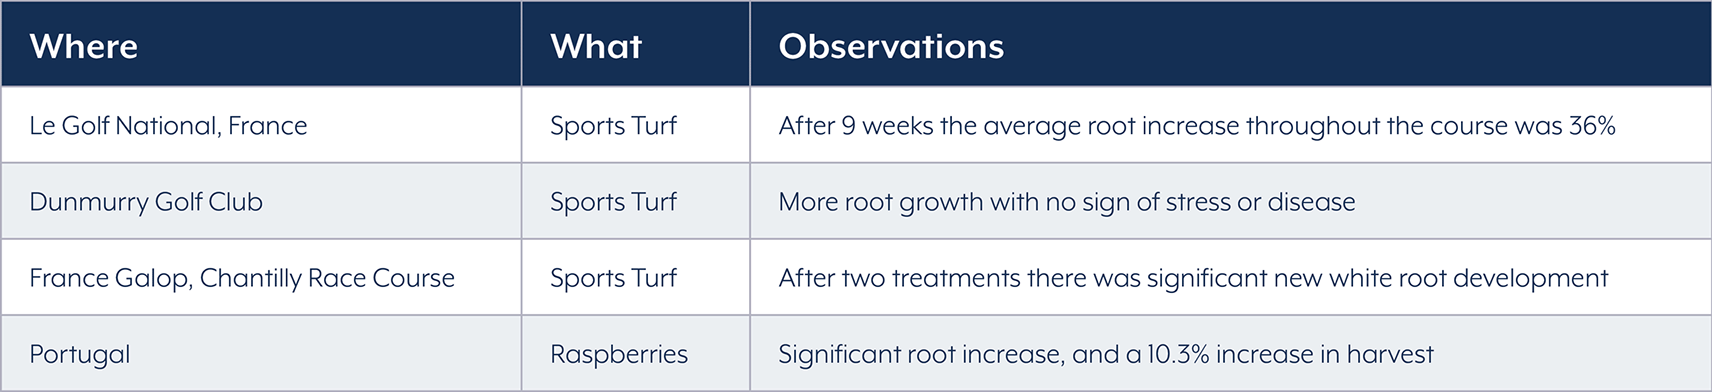 root observations table